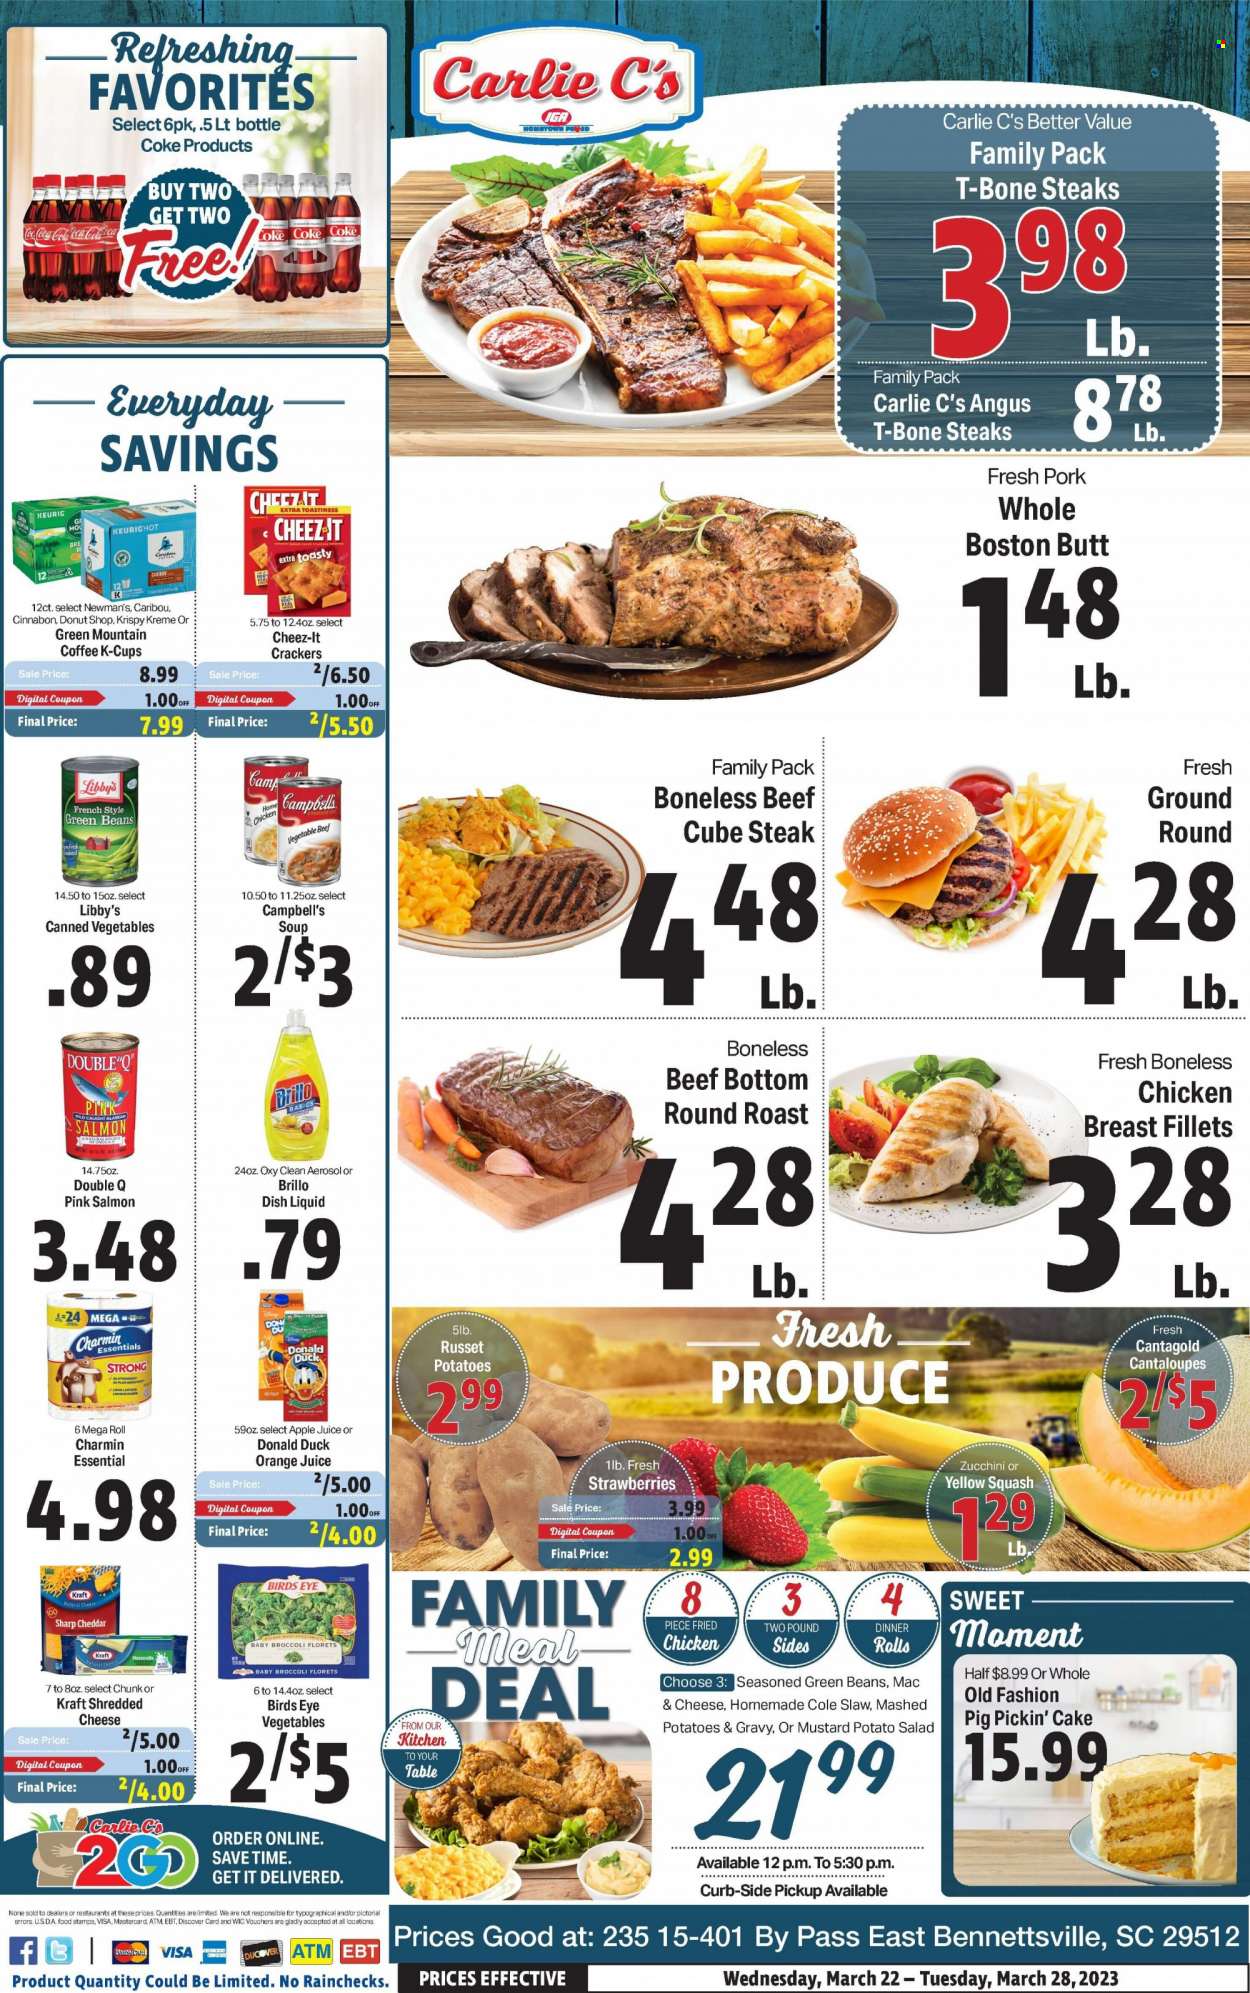 thumbnail - Carlie C's Flyer - 03/22/2023 - 03/28/2023 - Sales products - cake, dinner rolls, broccoli, cantaloupe, green beans, russet potatoes, zucchini, salad, yellow squash, strawberries, salmon, Campbell's, mashed potatoes, soup, Bird's Eye, Kraft®, boston butt, roast, potato salad, mozzarella, shredded cheese, crackers, Cheez-It, canned vegetables, mustard, apple juice, Coca-Cola, orange juice, juice, Coke, coffee, coffee capsules, K-Cups, Keurig, Green Mountain, chicken breasts, chicken, beef meat, t-bone steak, steak, round roast, Charmin, dishwashing liquid. Page 1.